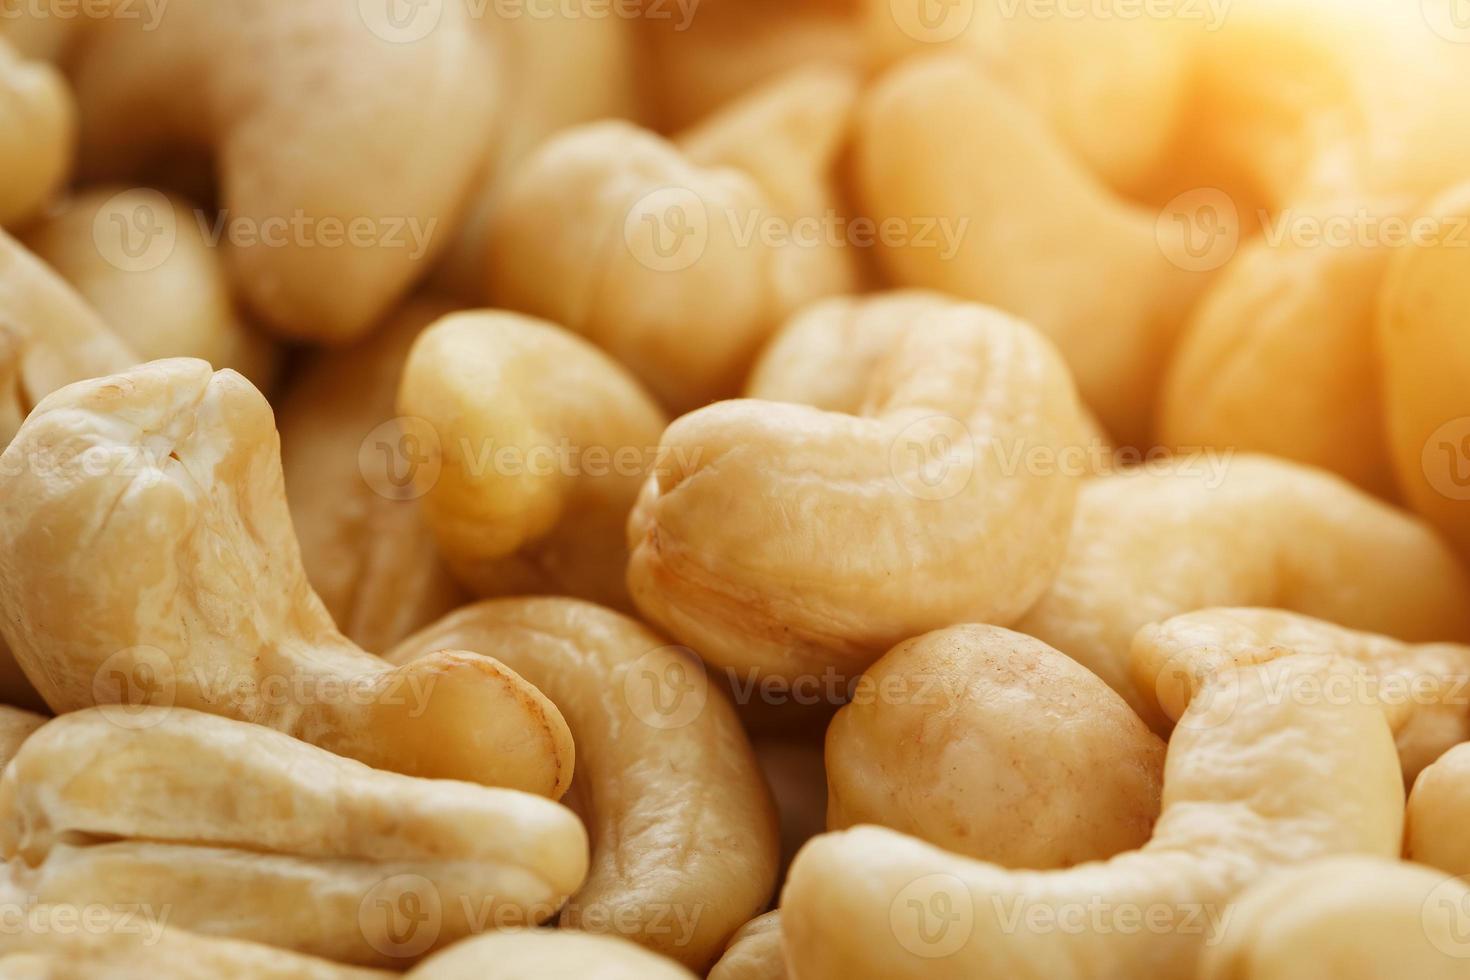 Organic Cashew with no shell on a background photo